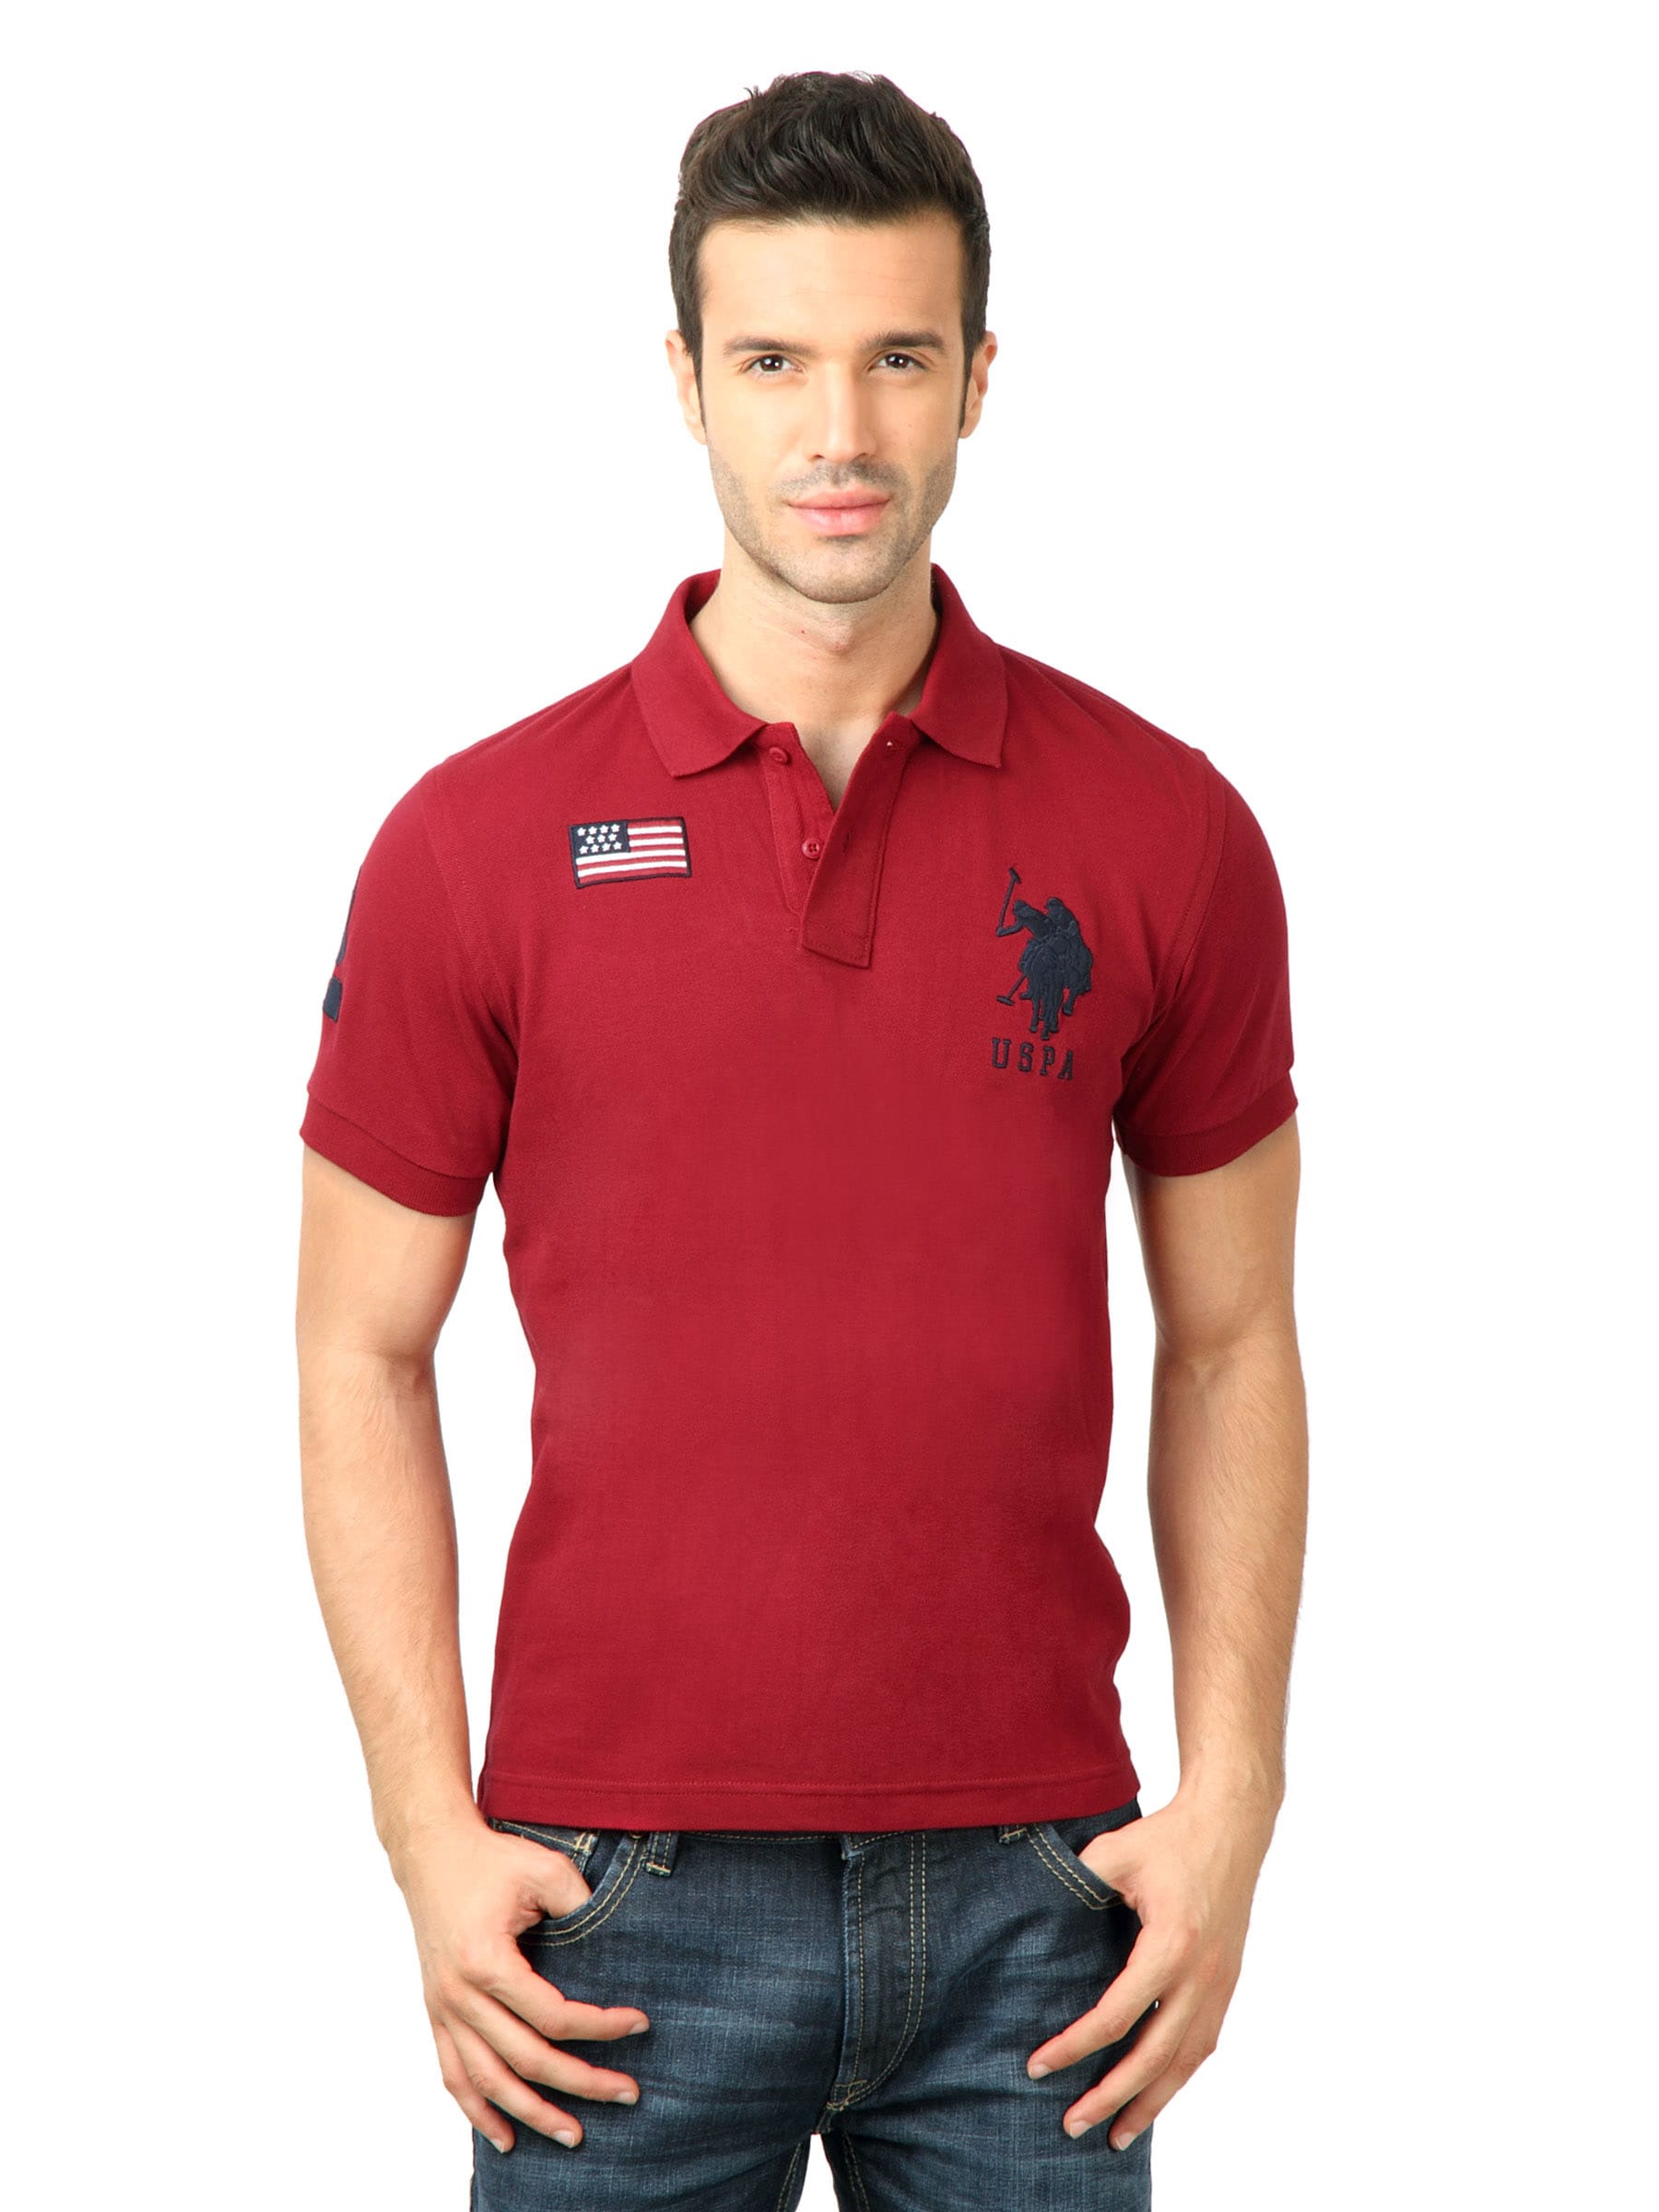 U.S. Polo Assn. Men Solid Red Tshirt